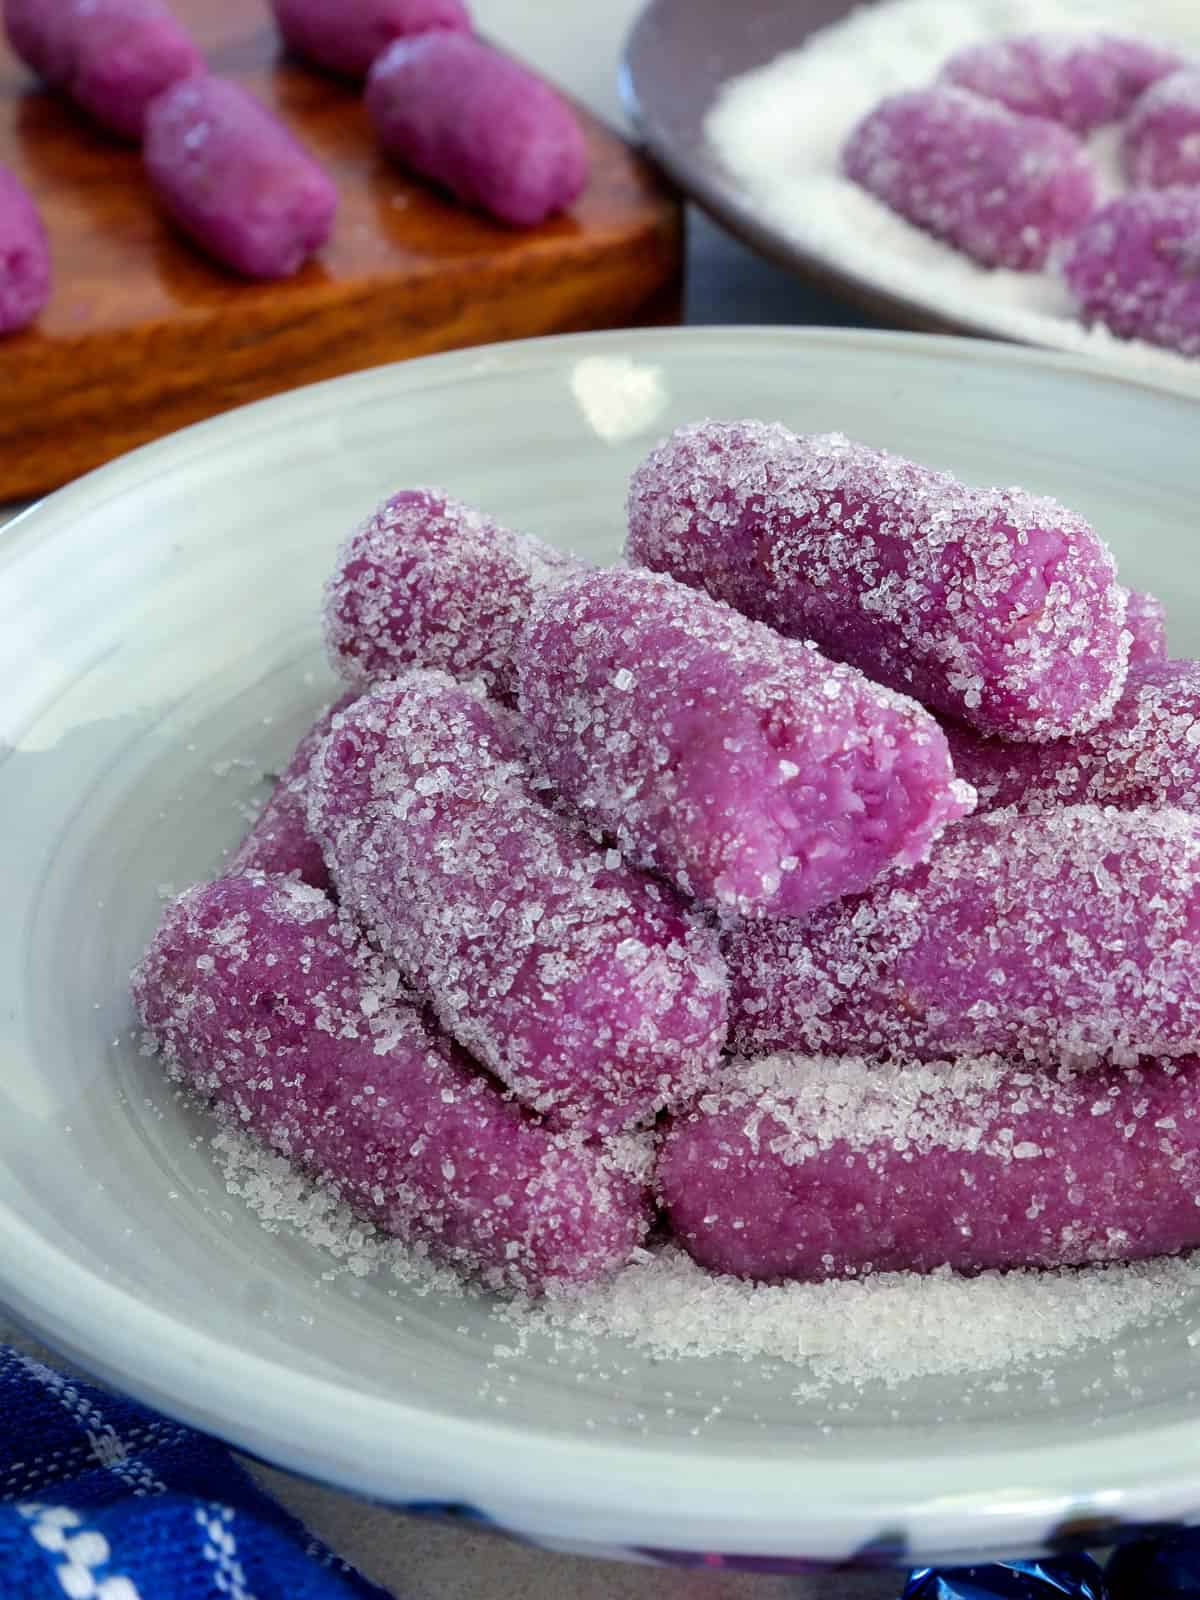 ube pastillas coasted with sugar on a plate